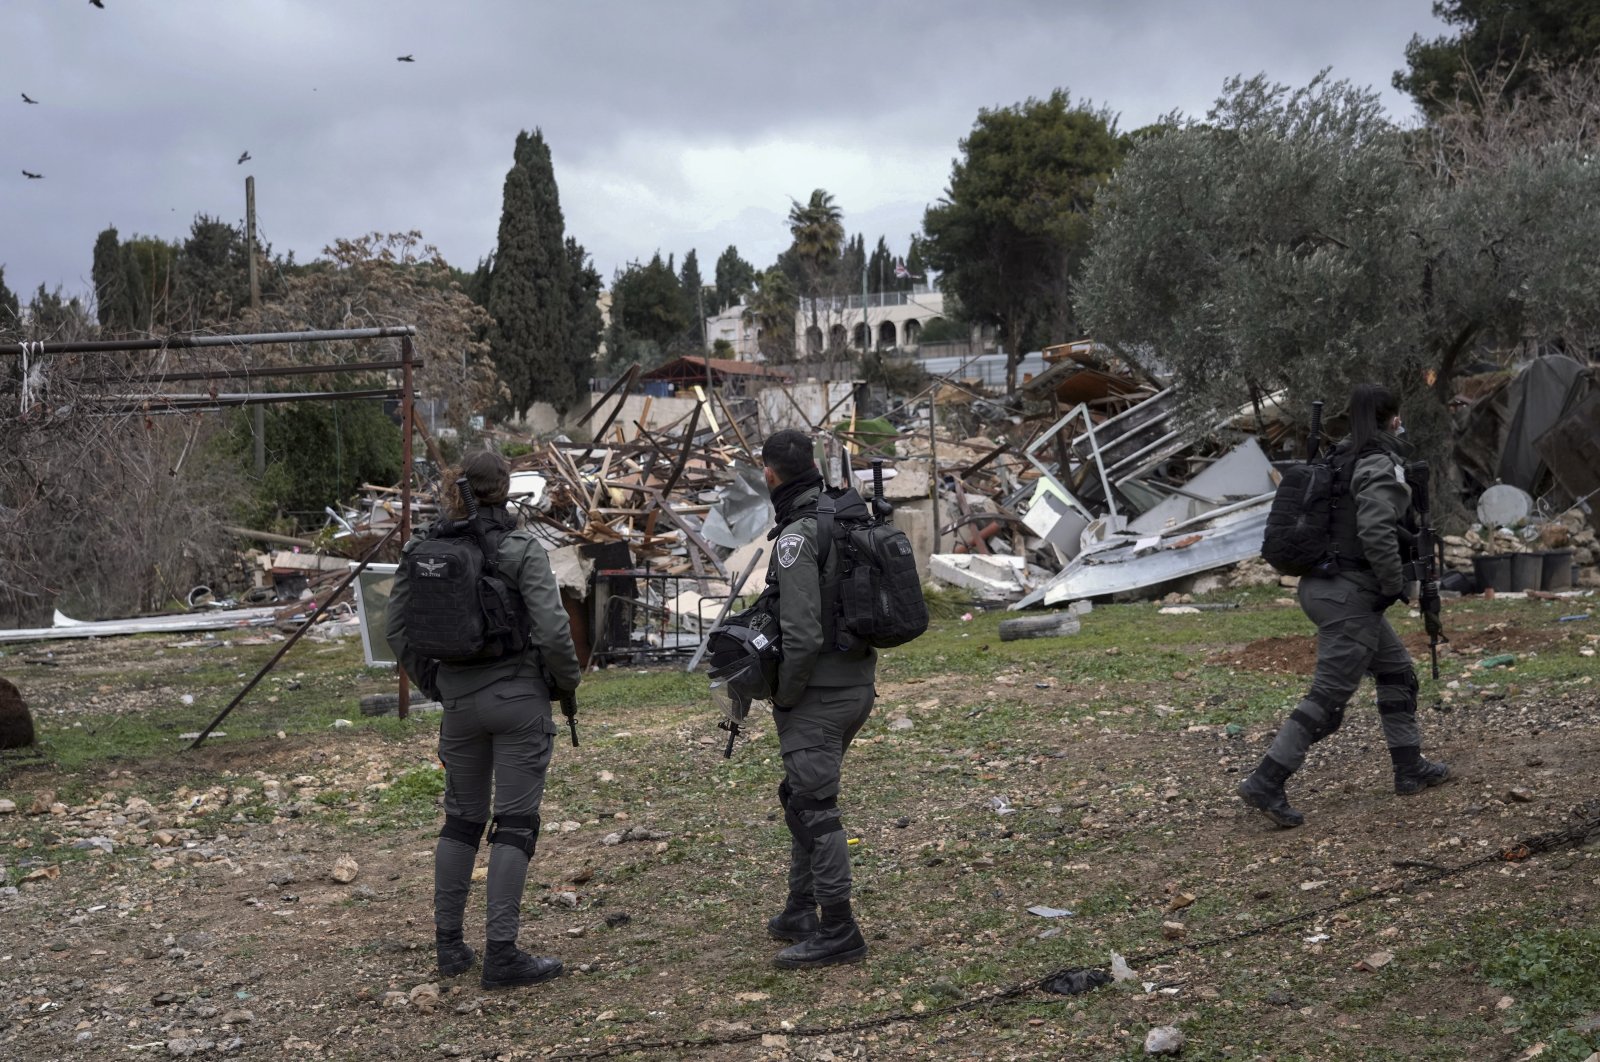 Israeli border police officers stand next to the ruins of a Palestinian house demolished by the Jerusalem municipality, in the flashpoint East Jerusalem neighborhood of Sheikh Jarrah, occupied Palestine, Jan. 19, 2022. (AP Photo)